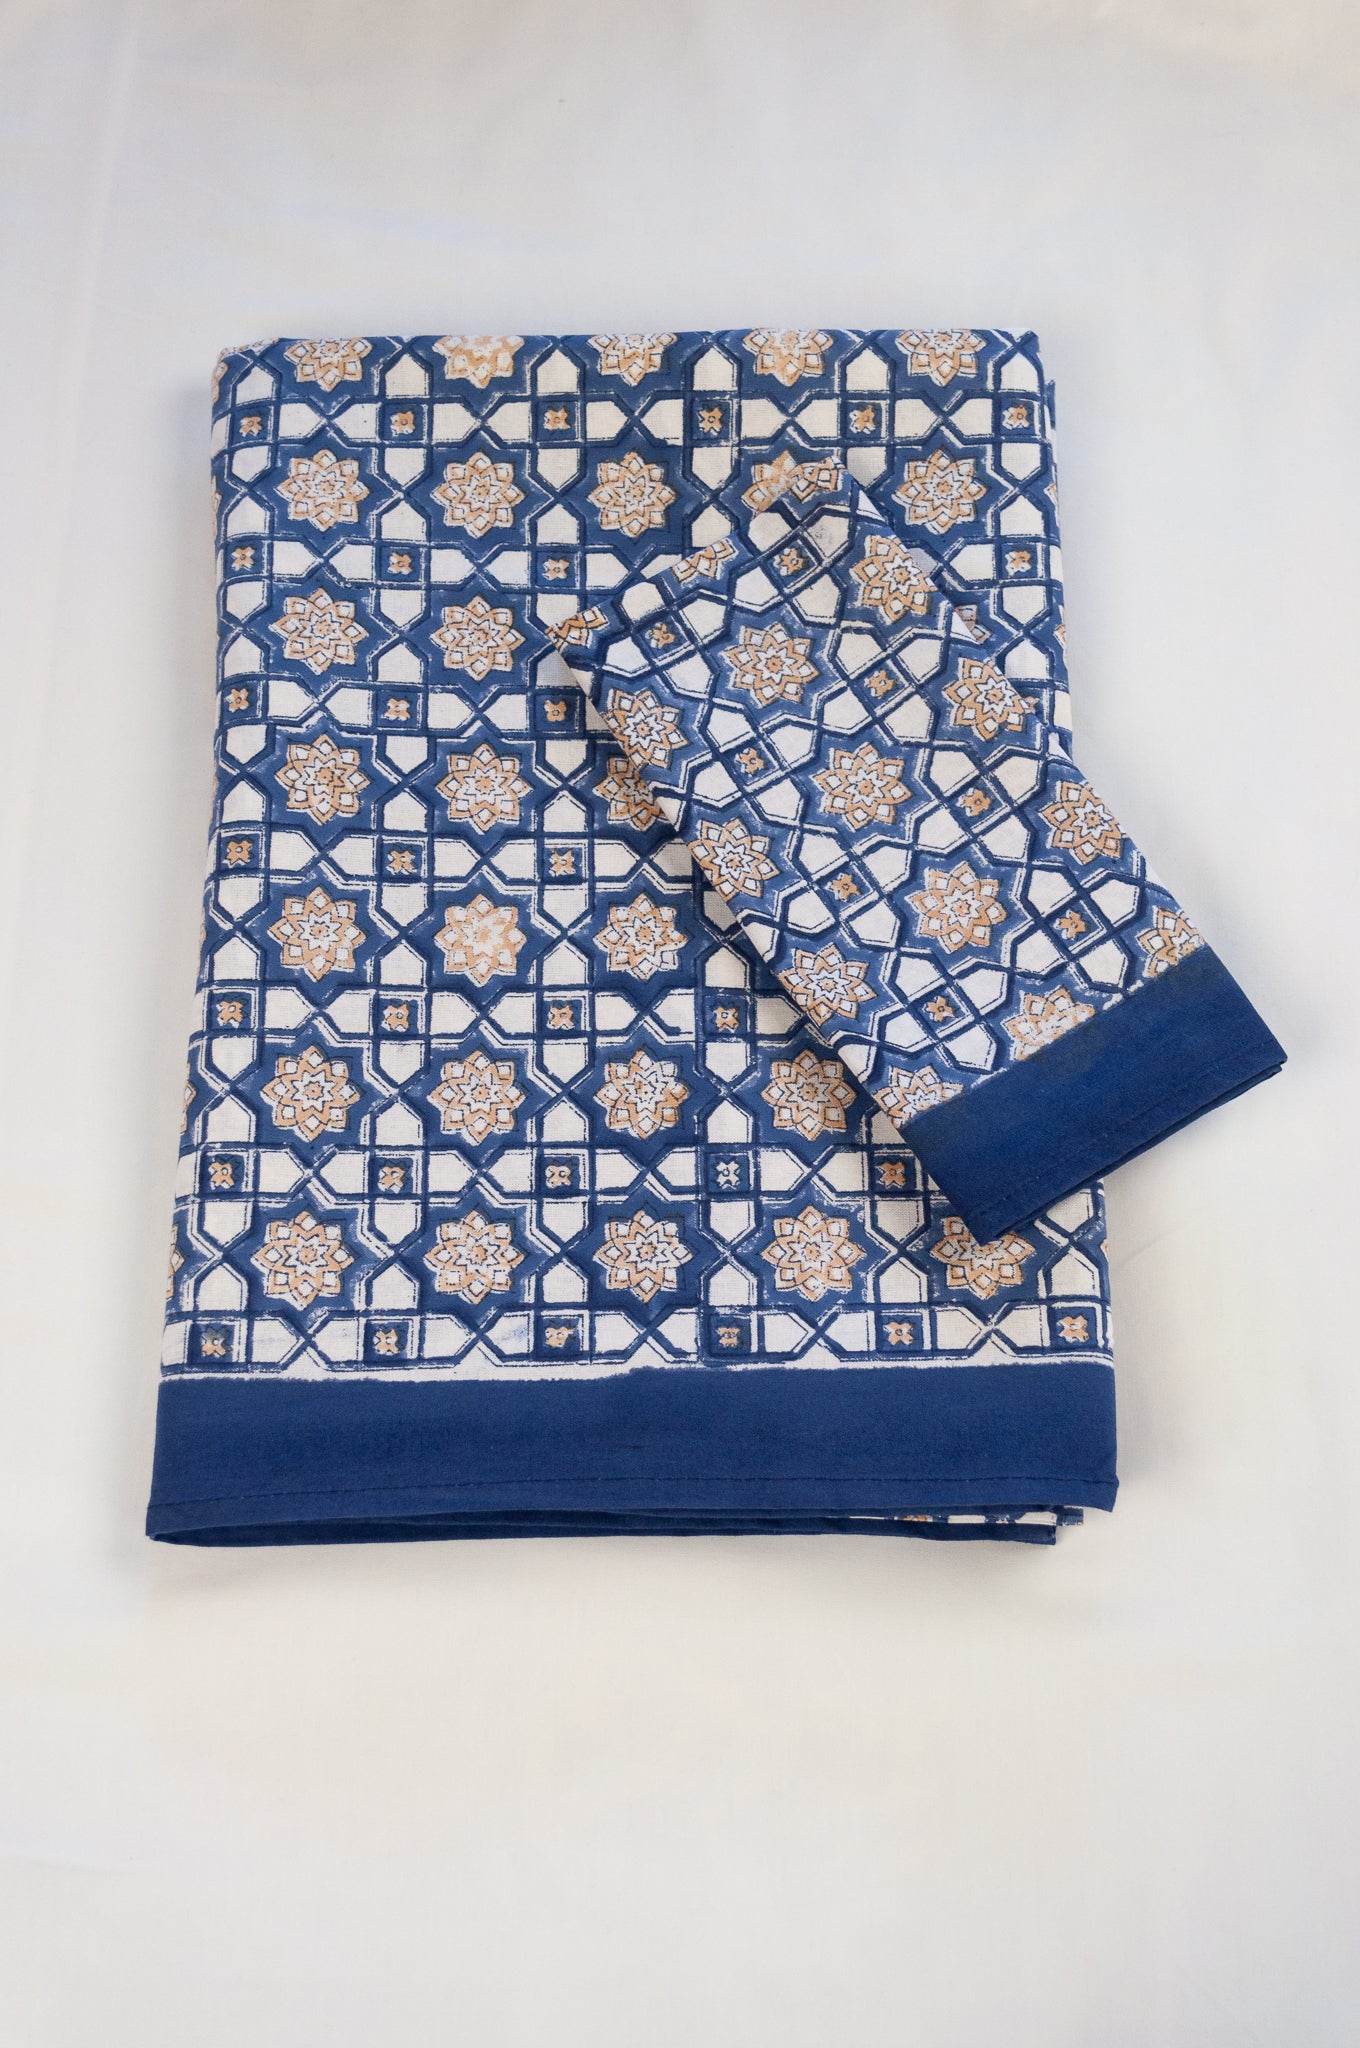 Blockprinted cotton table cloth, Almira Moroccan tile print in indigo denim blue and white with soft gold highlights. 